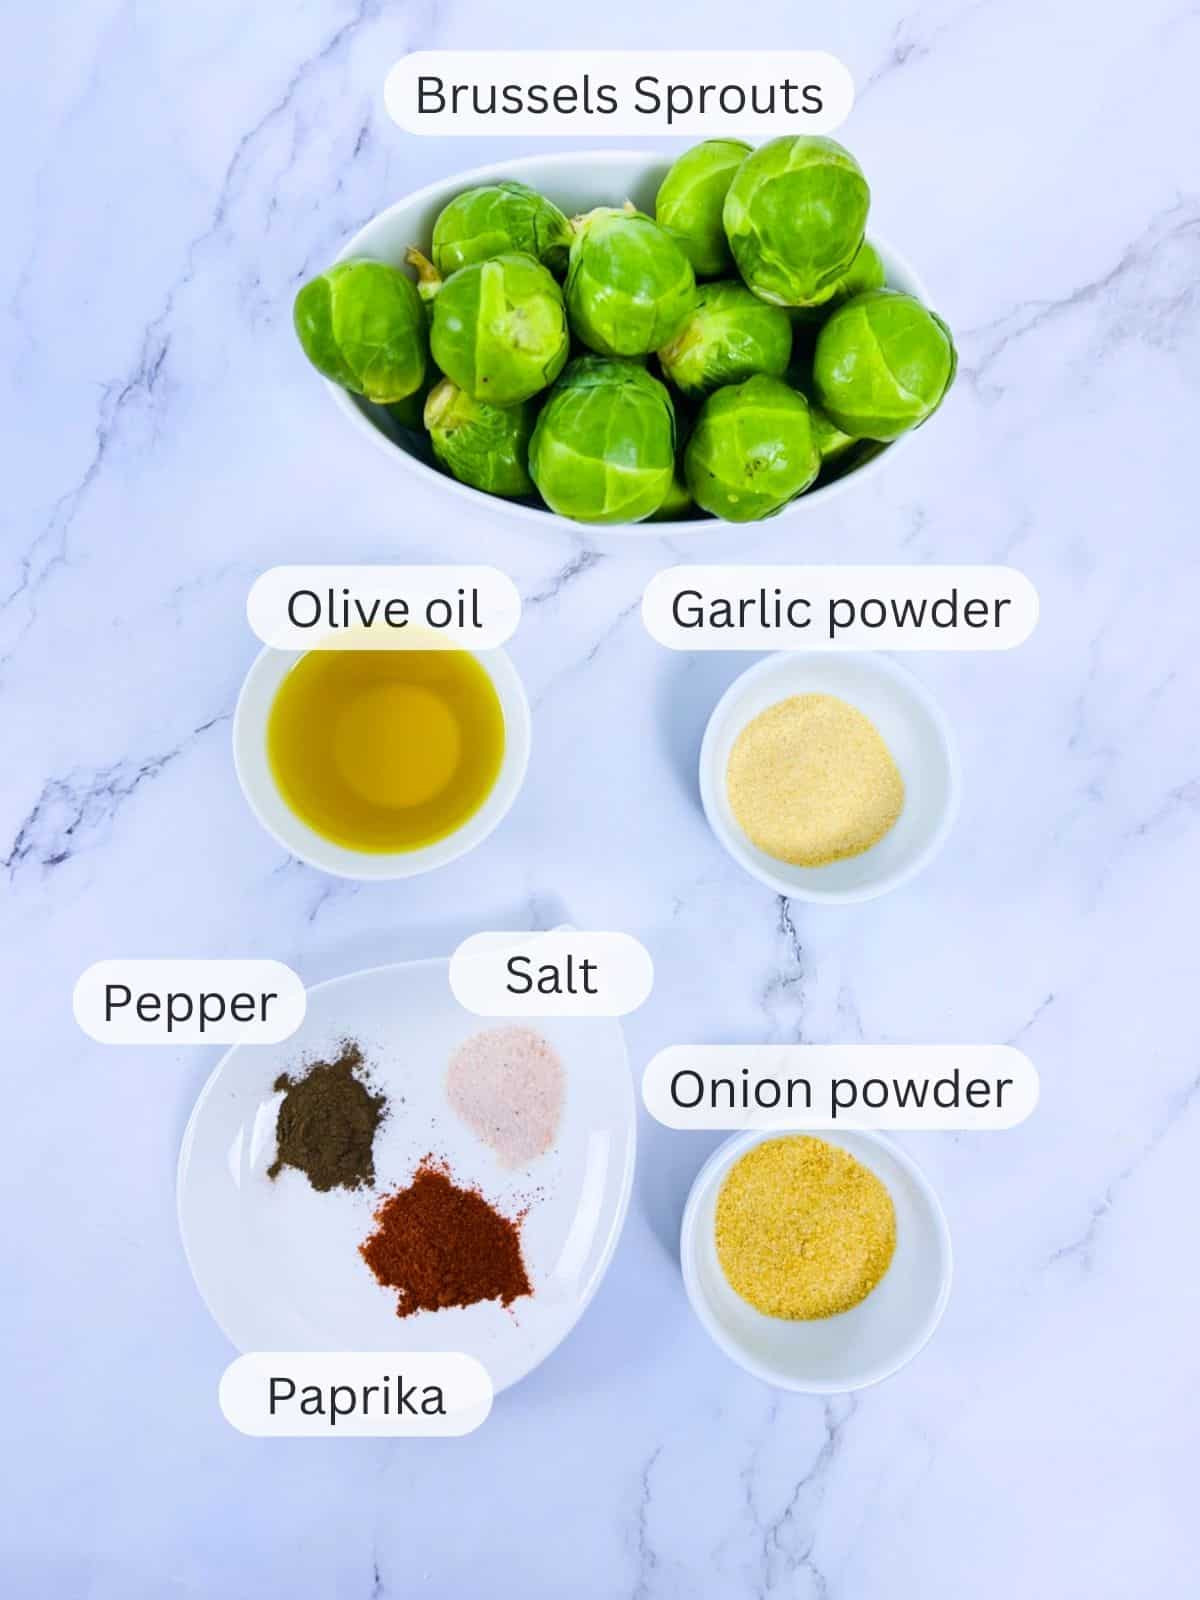 Ingredients to make Brussels sprouts placed on a marbel background.